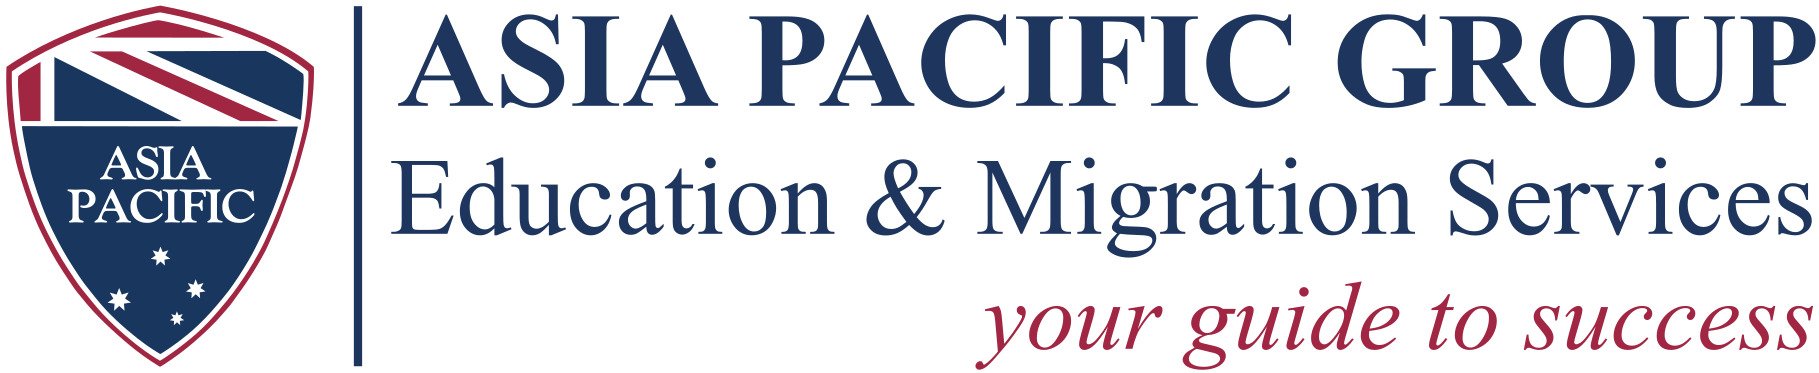 Asia Pacific Group – Education Consultants & Migration Agents logo